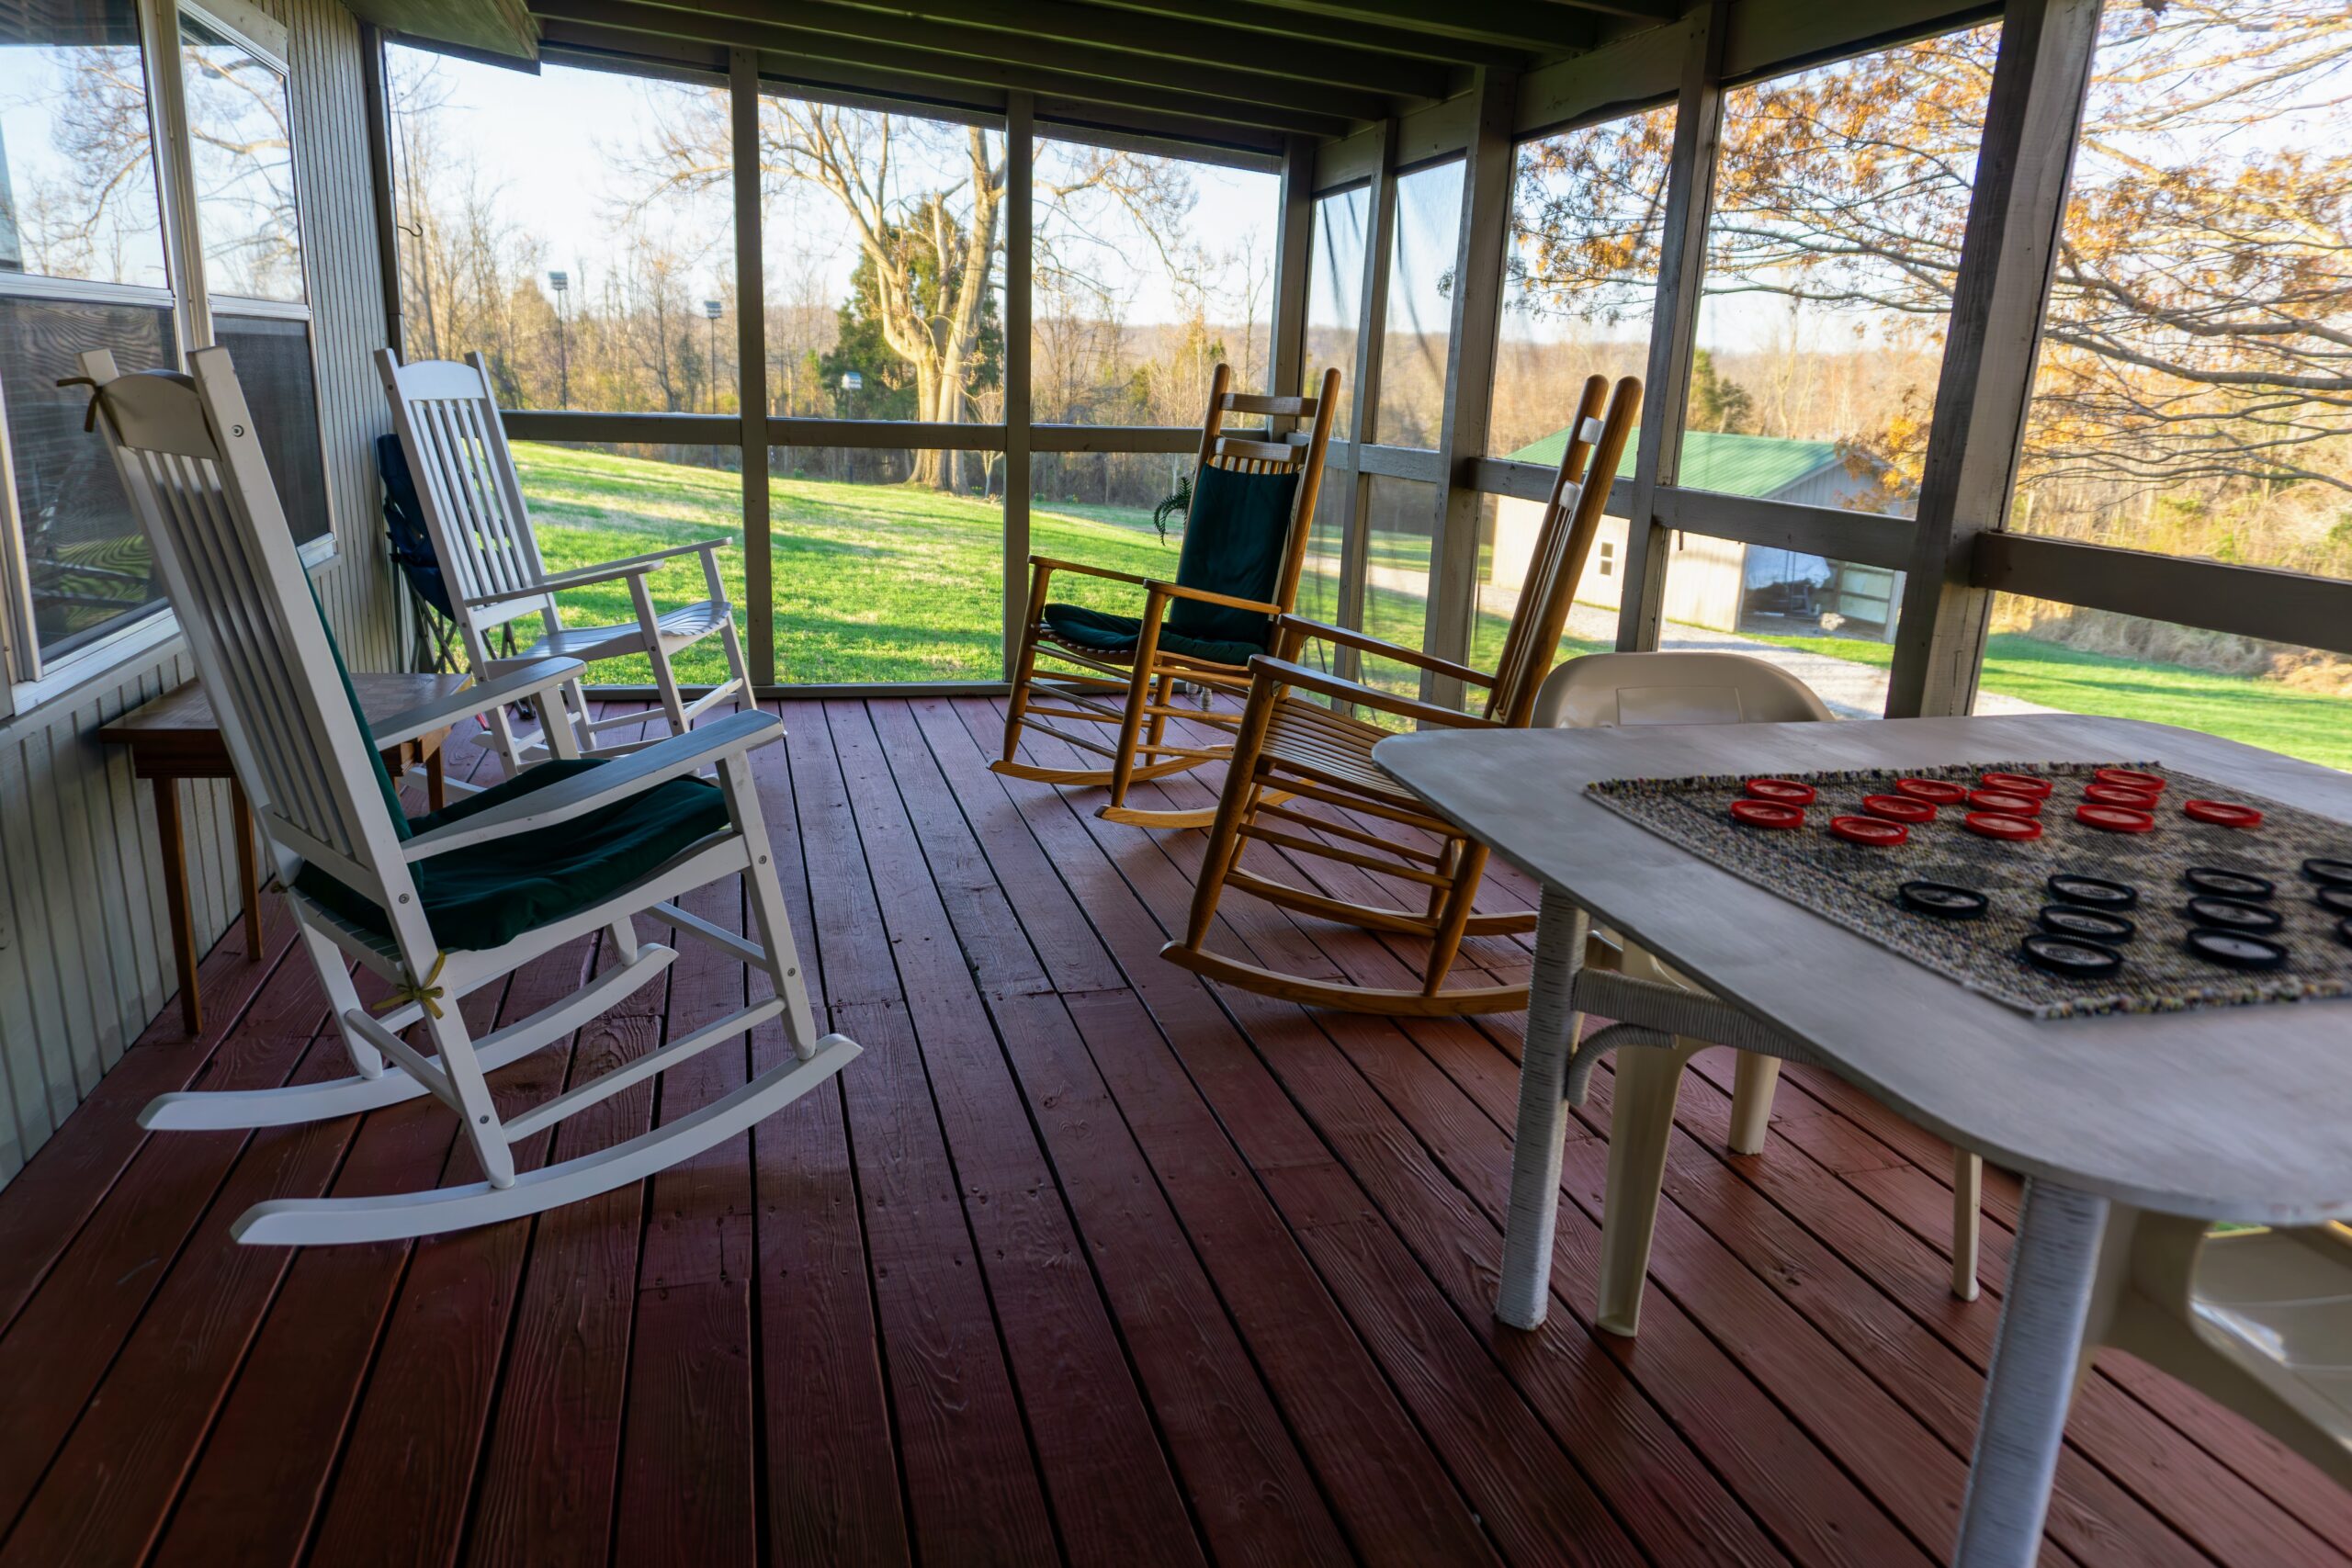 Screened front porch of Cabin #1 at Serenity Cabins, equipped with four wooden rocking chairs and a game table, overlooking a tranquil natural setting.